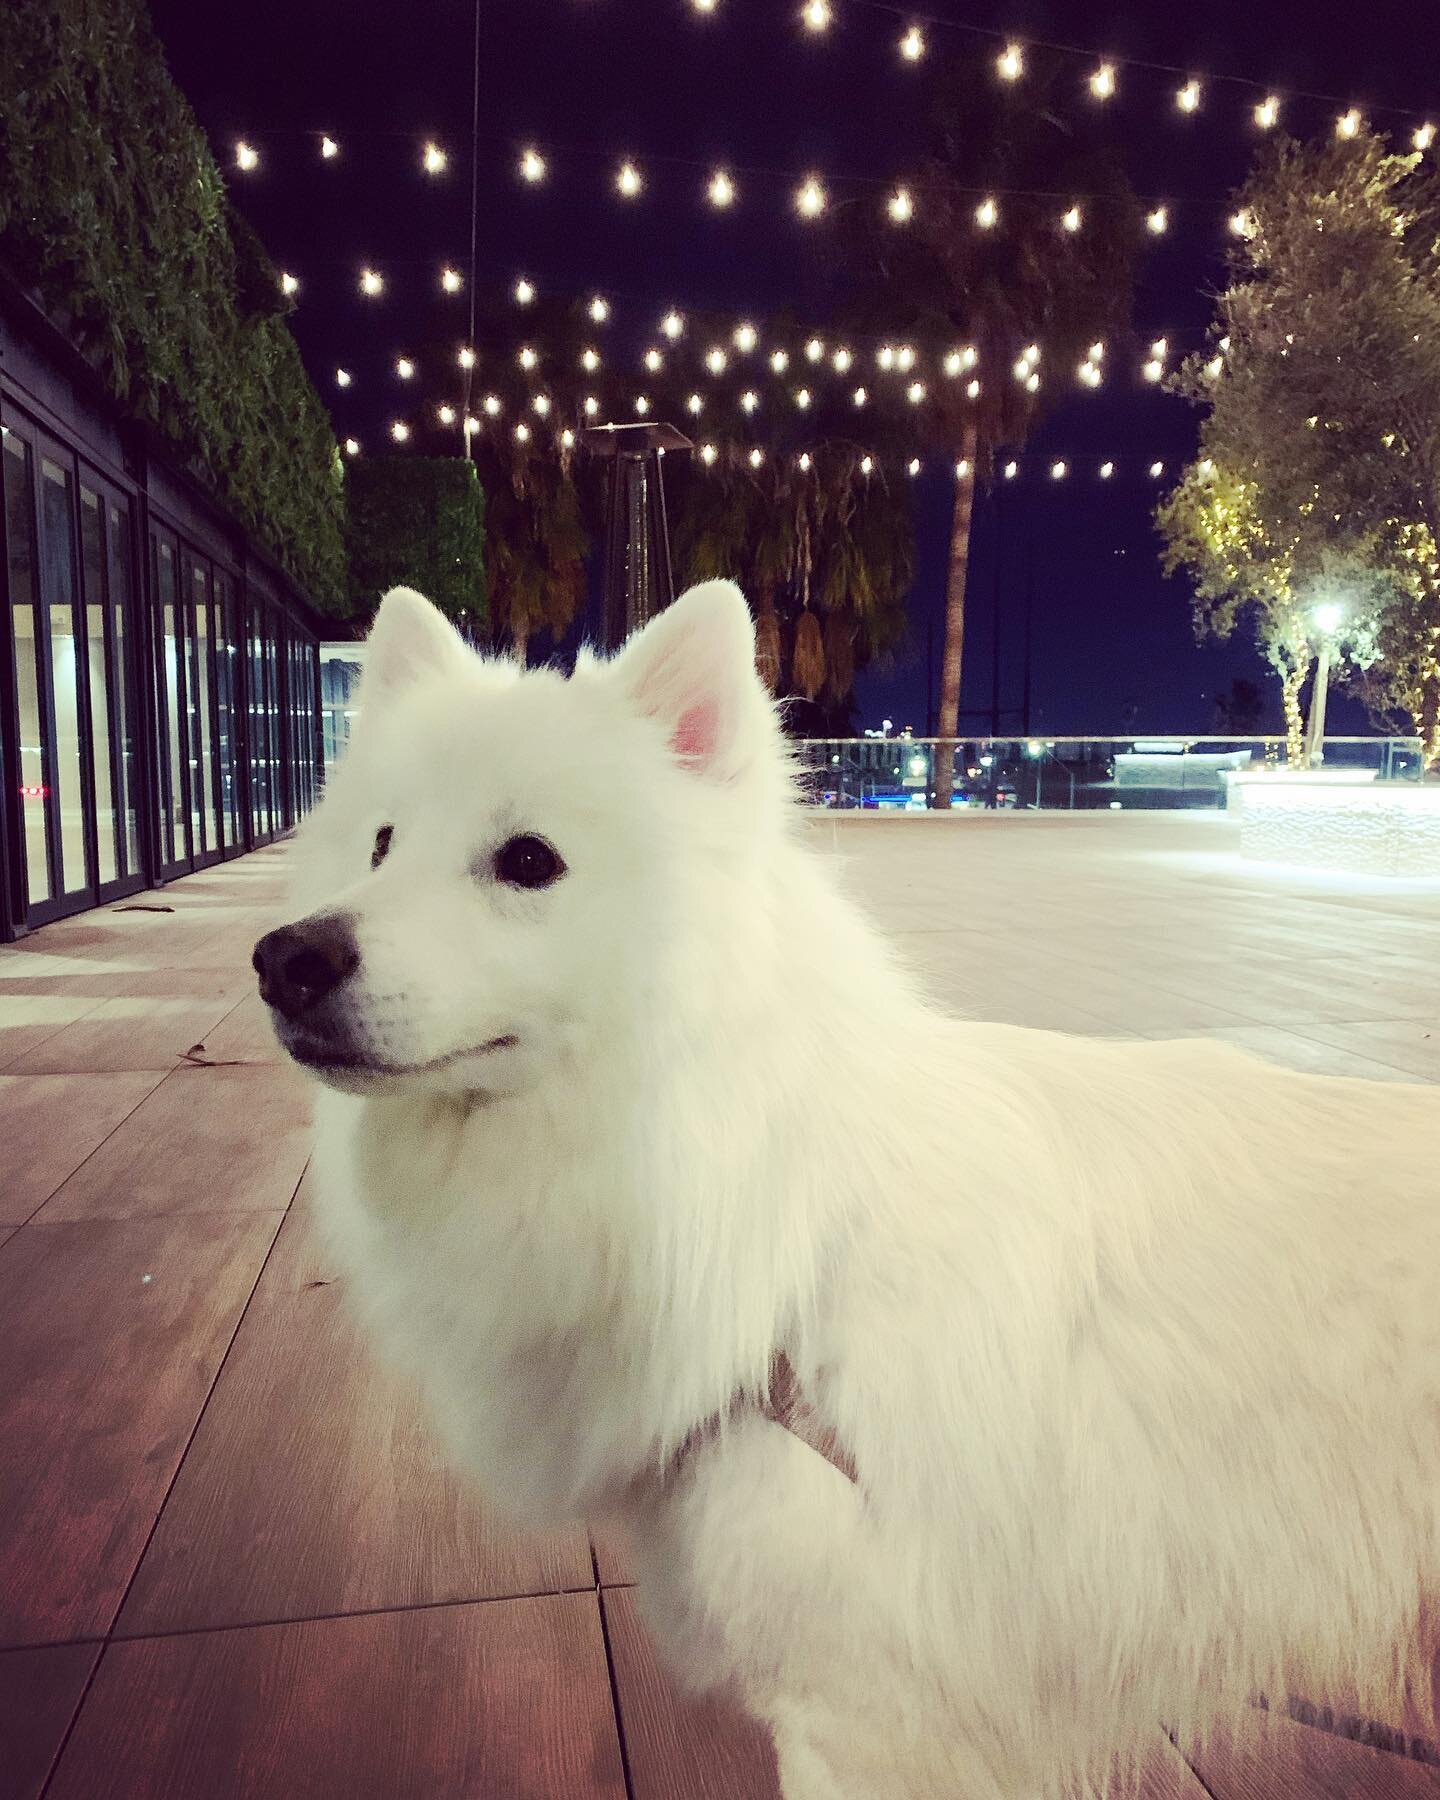 Friends @palmsophiarooftop is pet friendly... yes your furry friend can be in your wedding ceremony...or ya know, this Snow White Ploof @kingsleythepuppyman is avail for rent a ring bearer services hehe... #larooftop #laoutdoorvenue #laoutdoorwedding